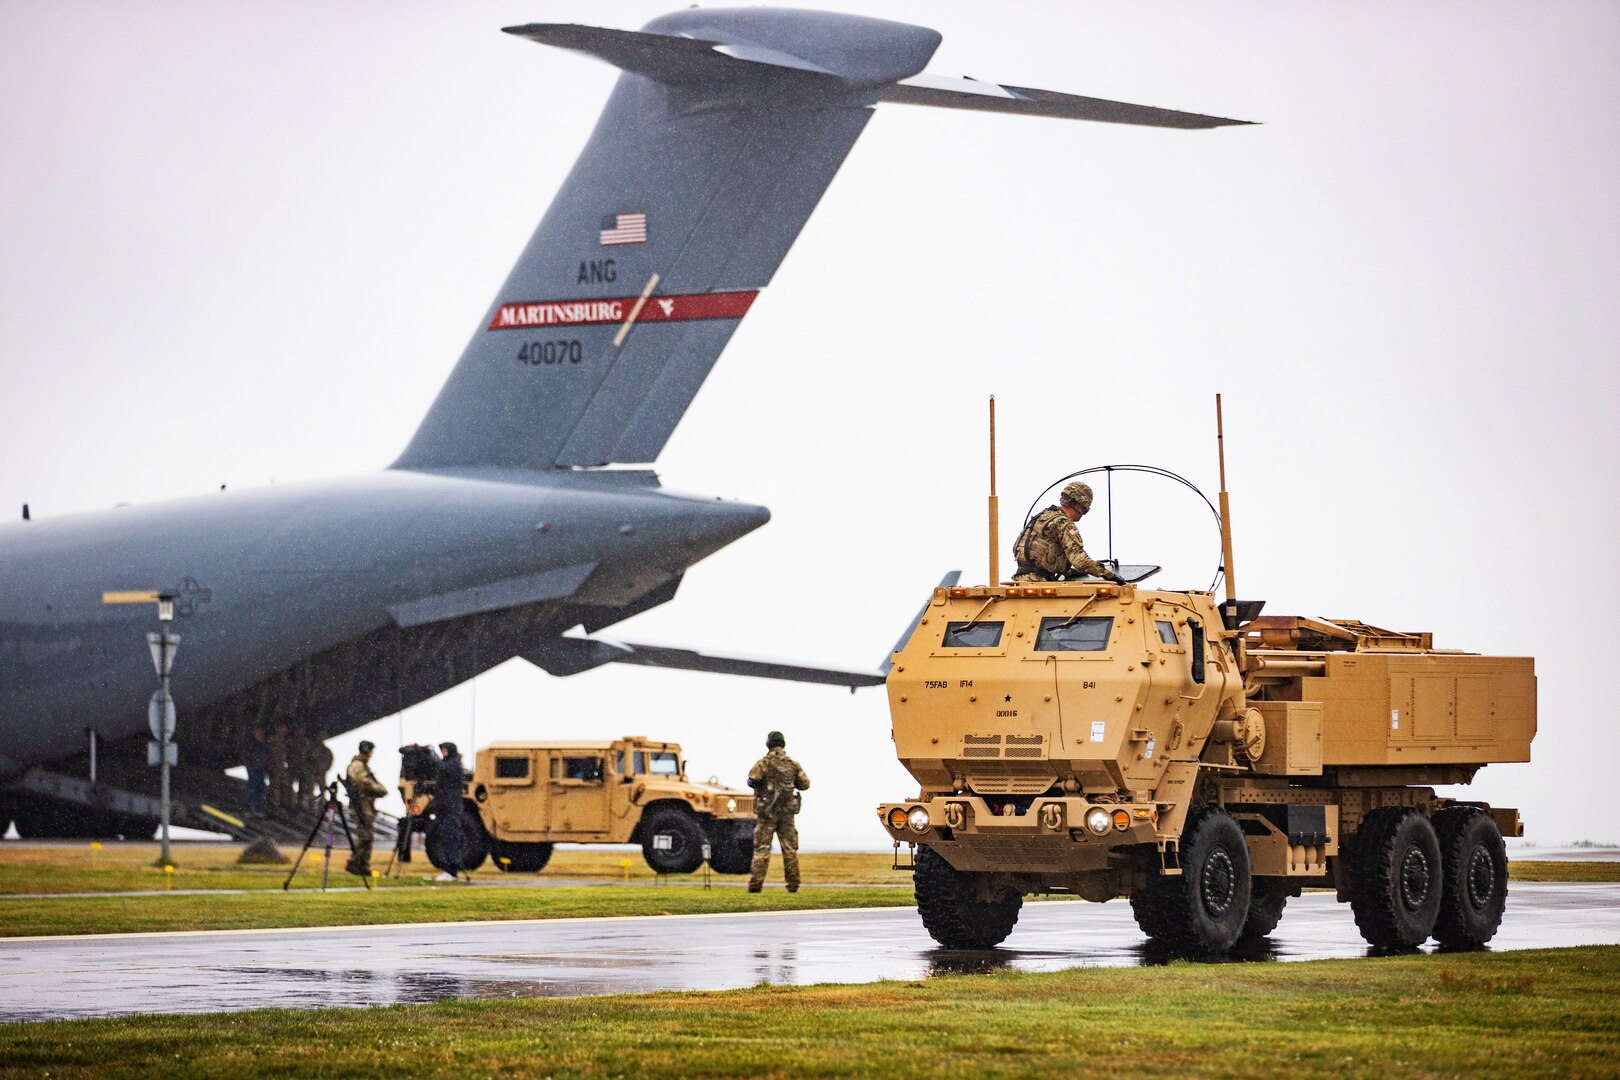 U.S. Army Soldiers, assigned to Bravo Battery, 1st Battalion, 14th Field Artillery Regiment, 75th Artillery Brigade; and U.S. Air Force Airmen, assigned to 167th Airlift Wing, West Virginia, Air National Guard, unload and employ a High Mobility Multipurpose Wheeled Vehicle and an M142 High Mobility Artillery Rocket System during a HIMARS Rapid Infiltration exercise as part of Defender Europe 22 at Bornholm, Denmark, May 24, 2022.